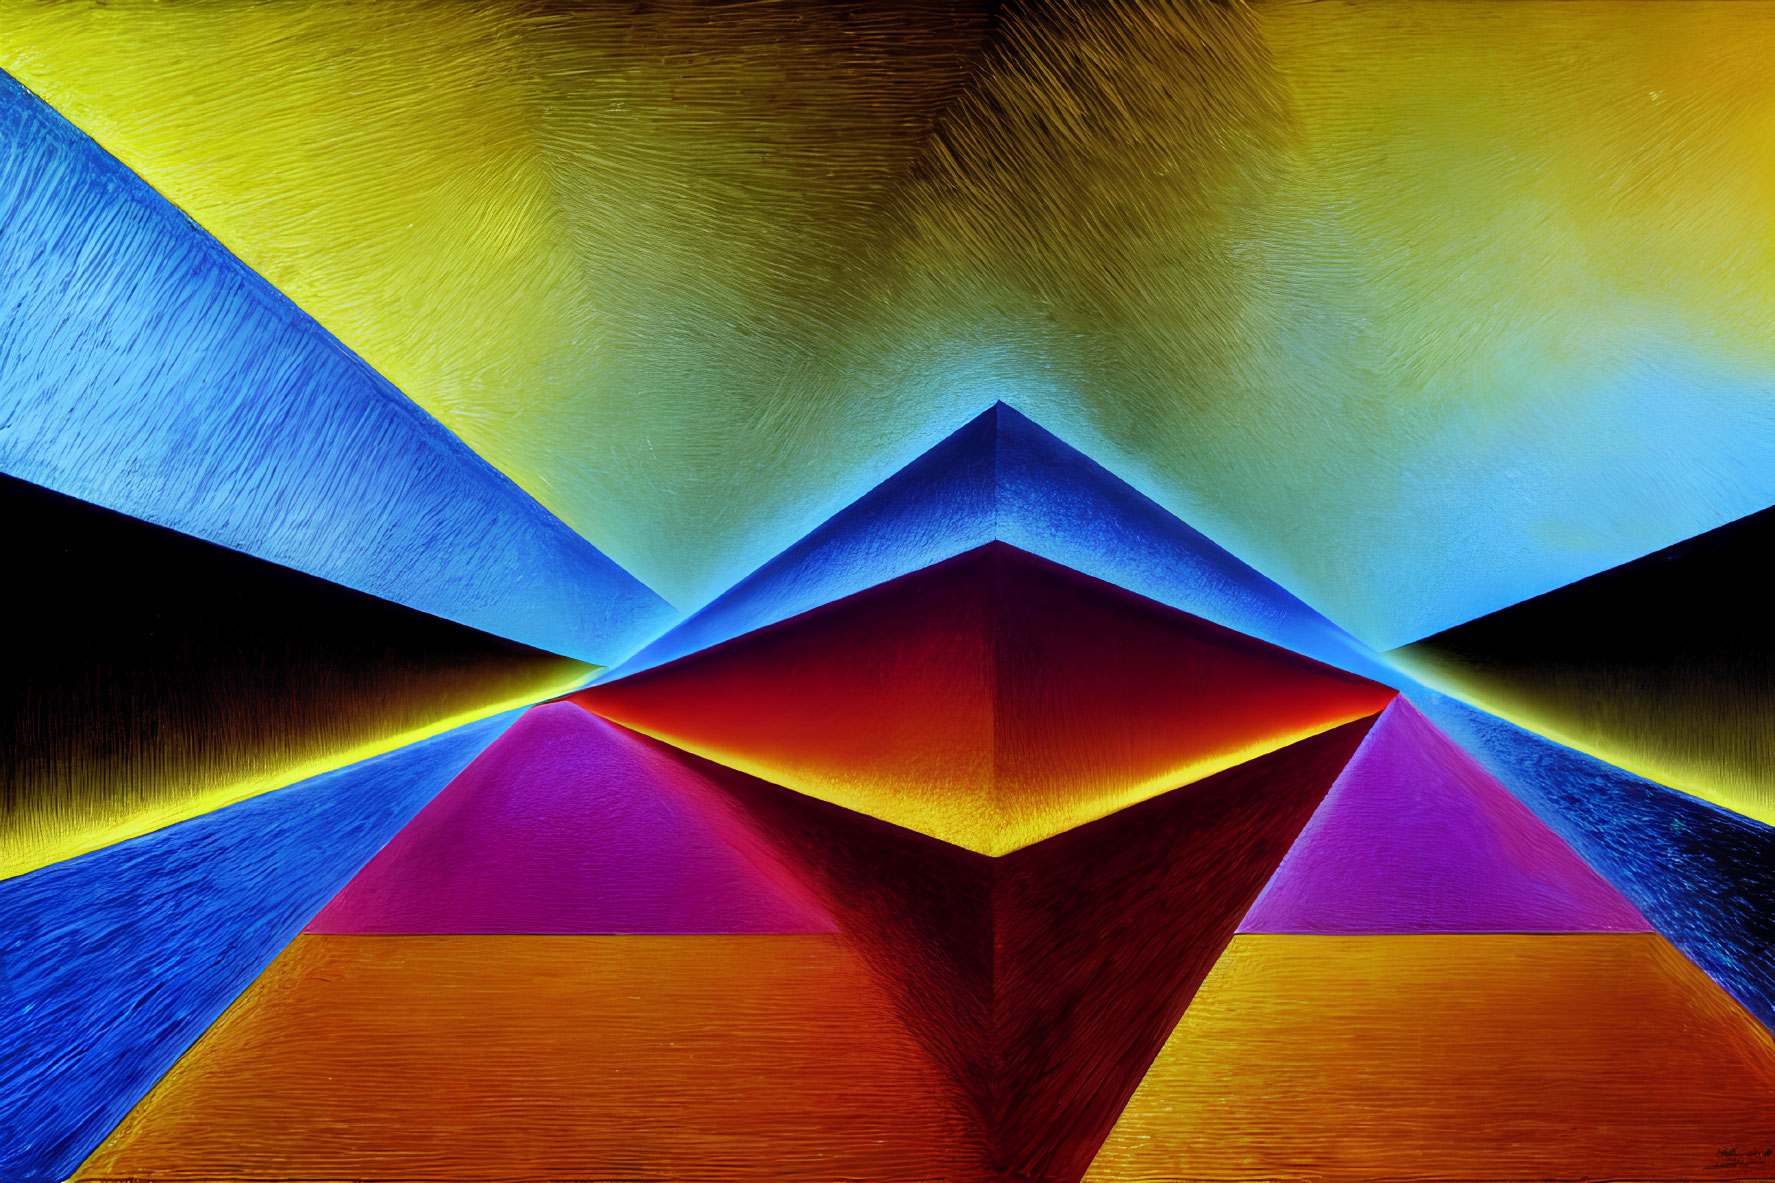 Vibrant 3D pyramid in red and yellow against blue backdrop